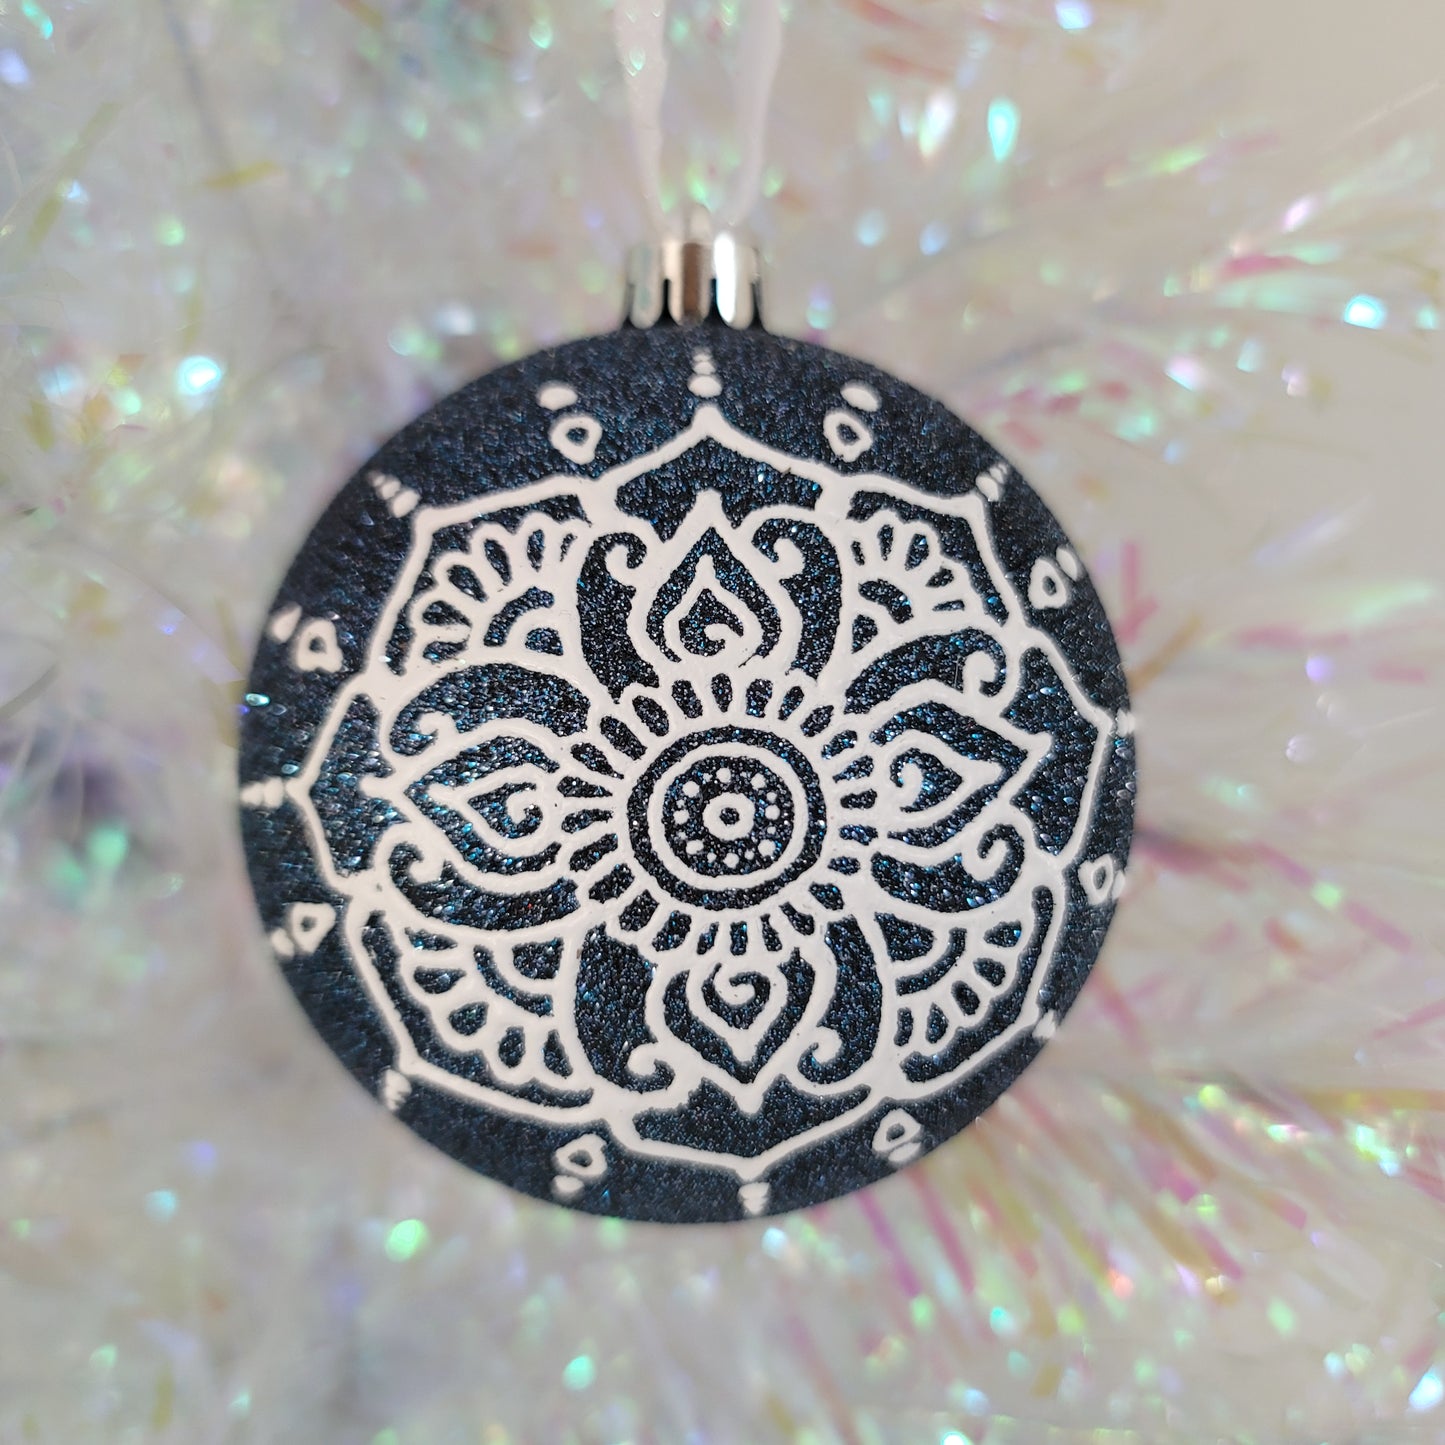 Large Hand-painted Ornament